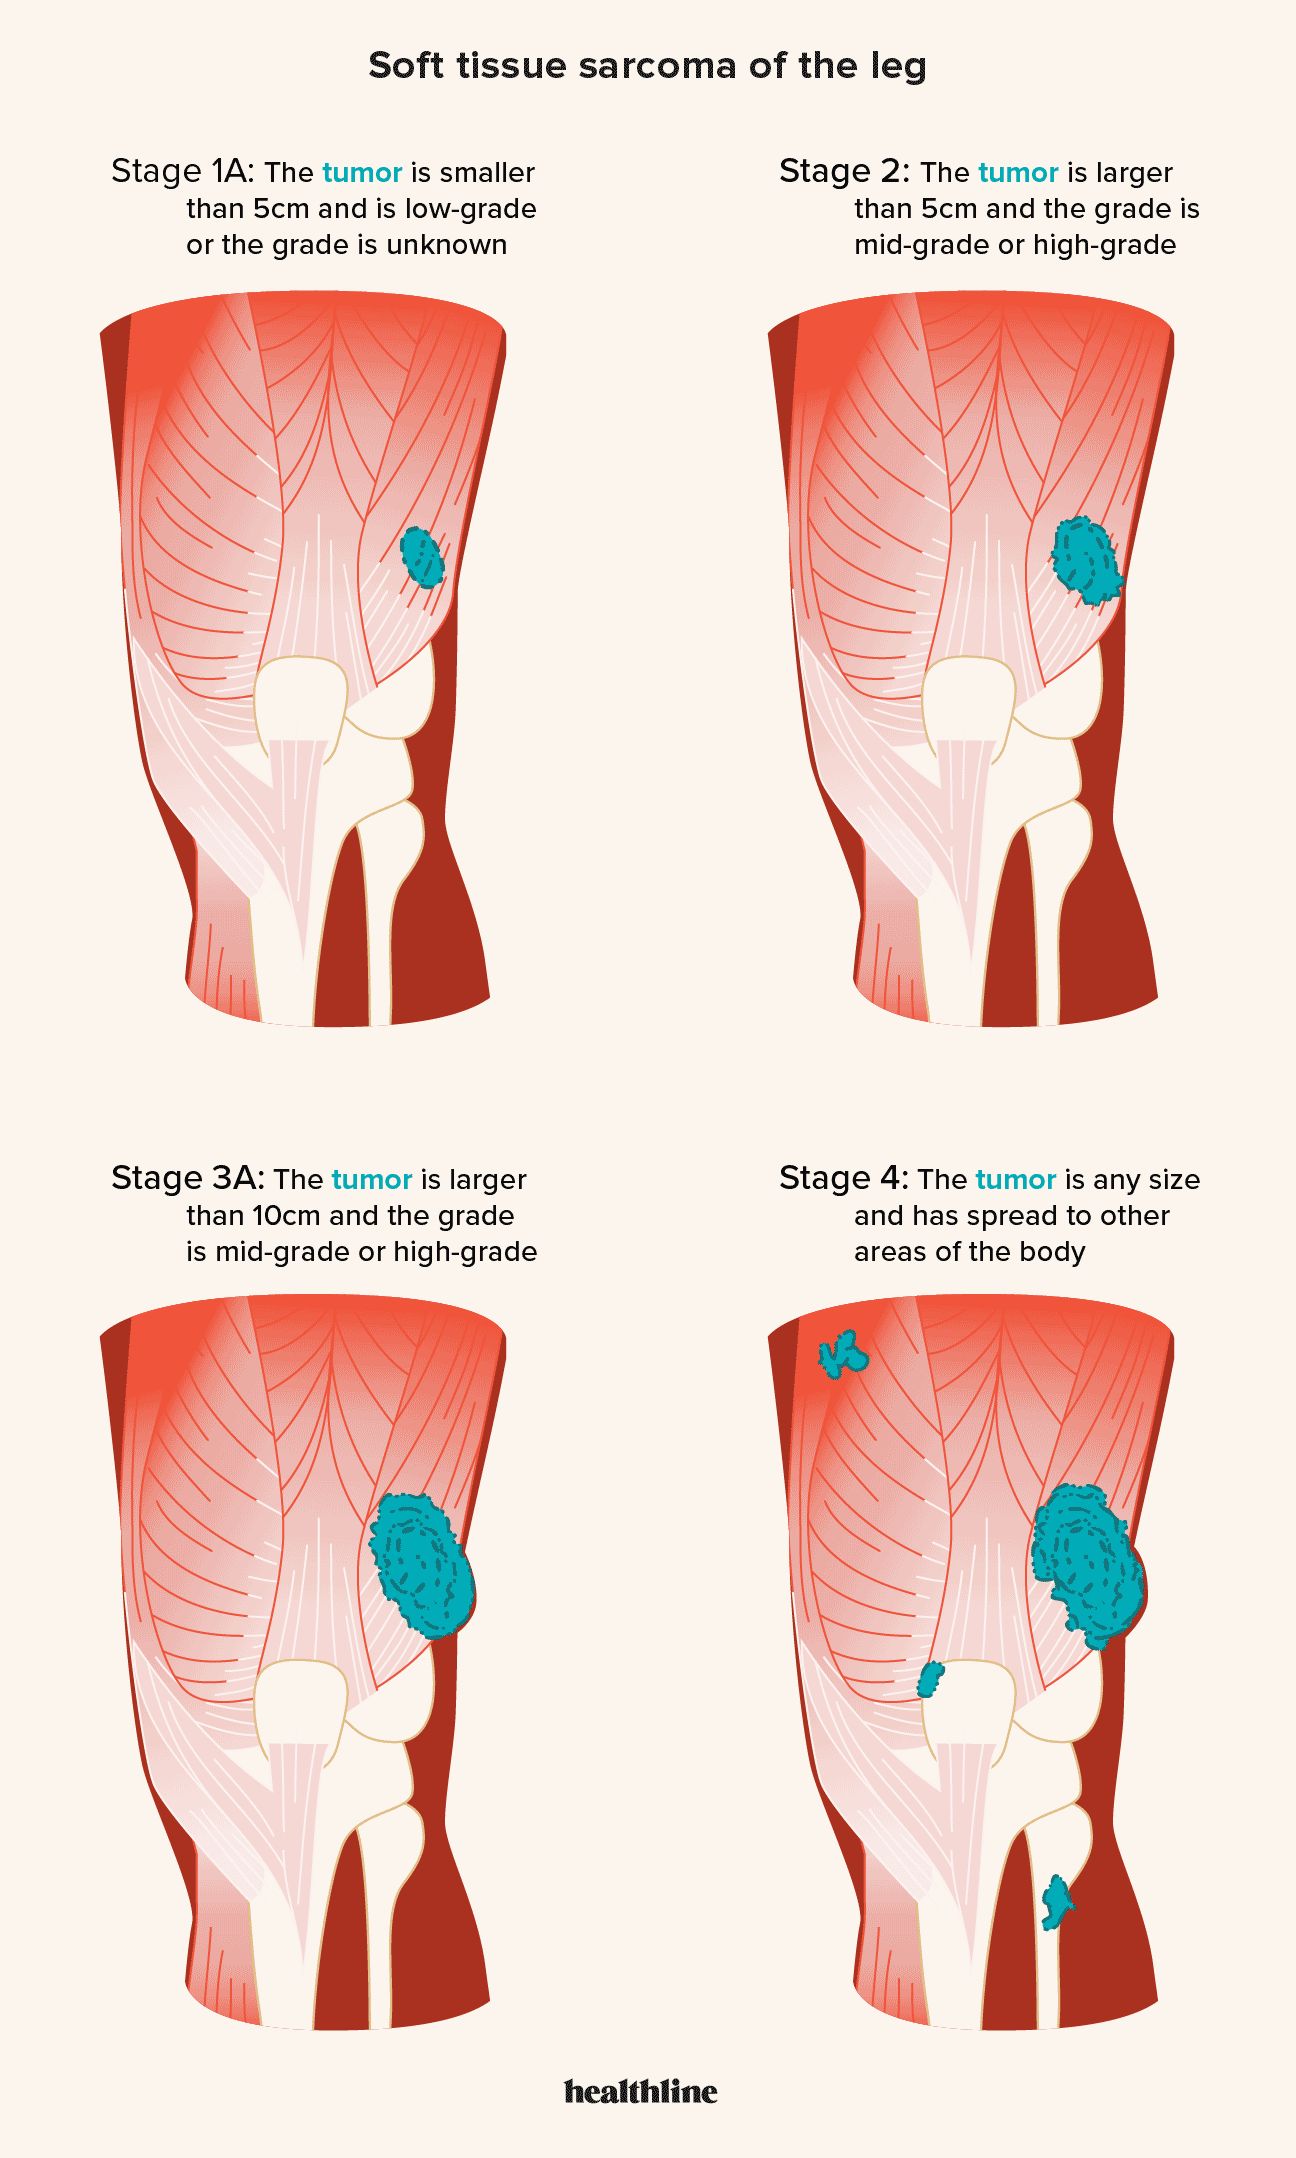 Illustration of different sized soft tissue sarcomas in the leg